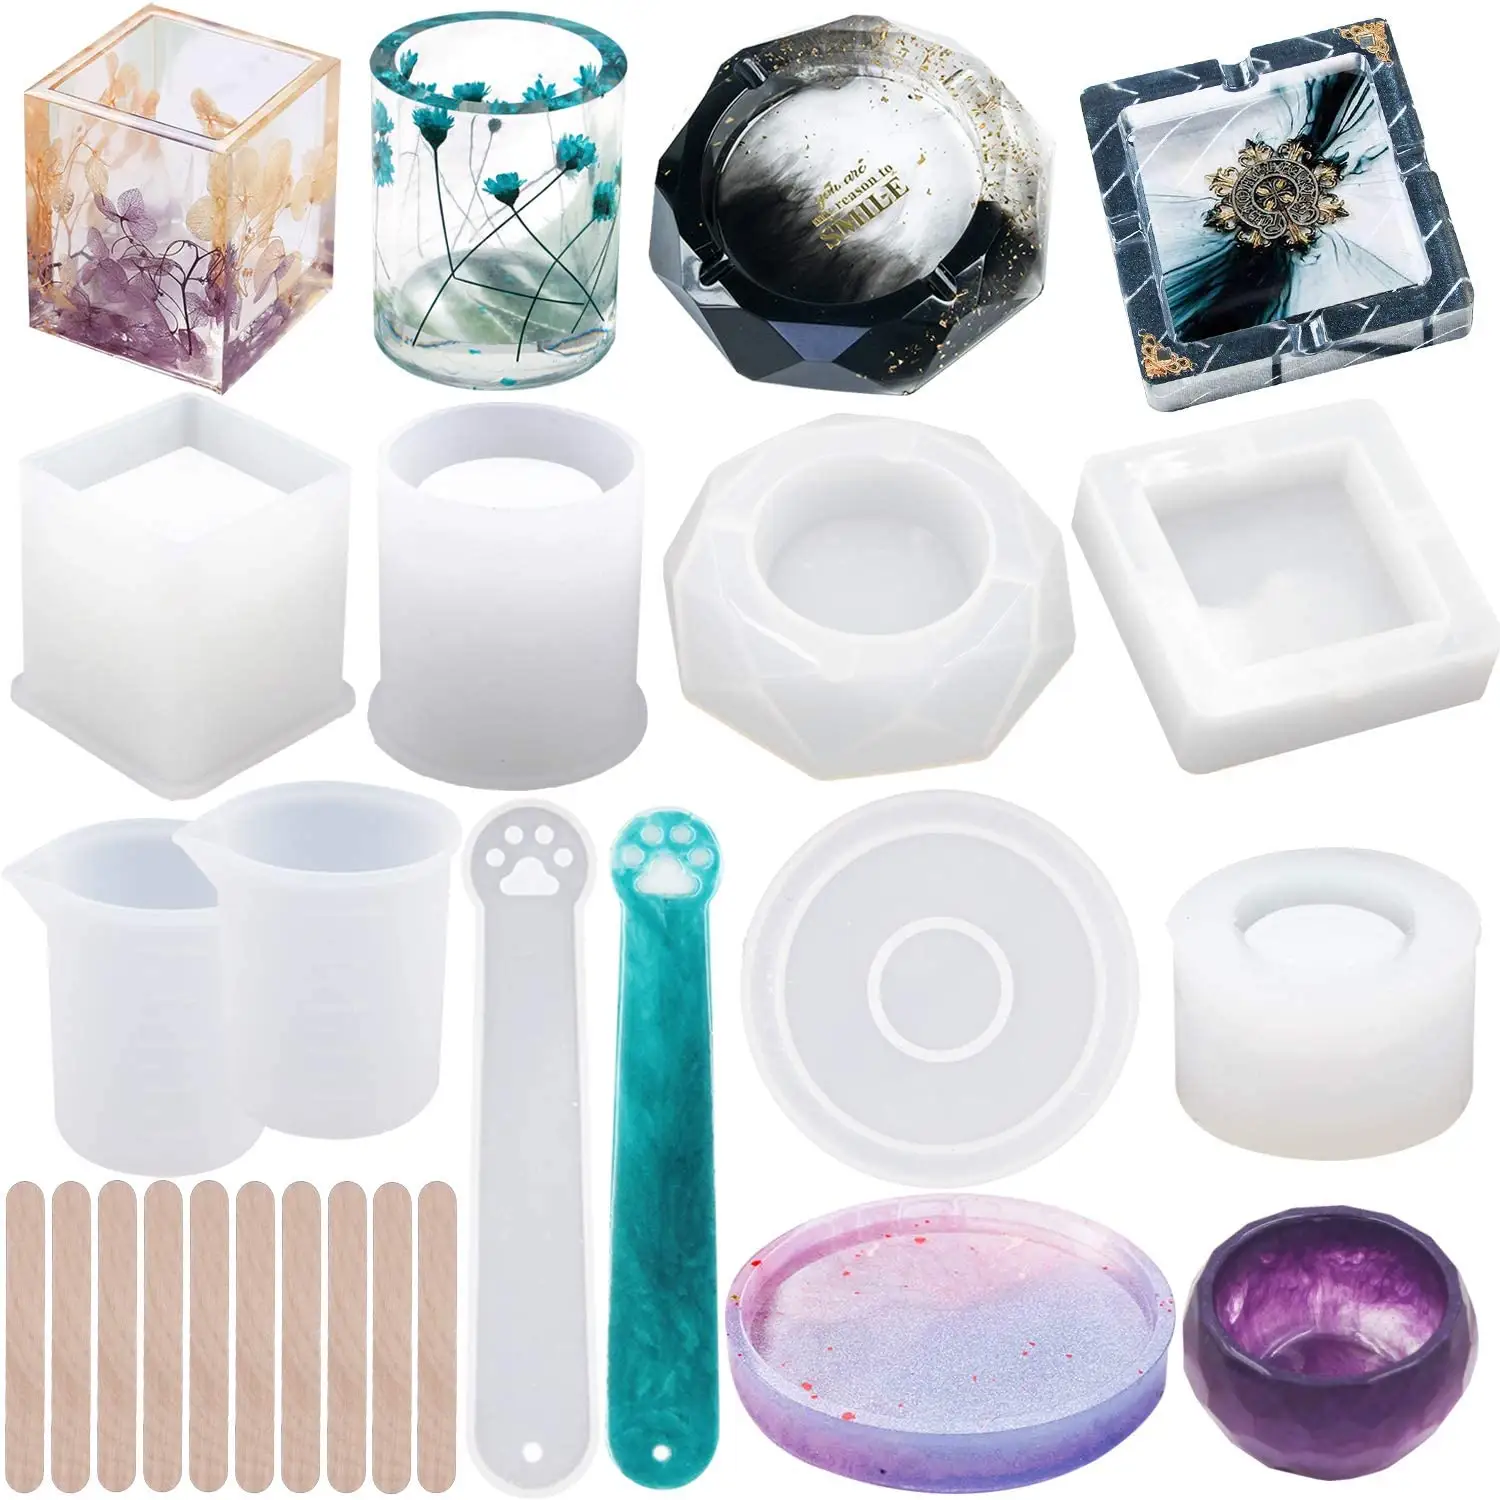 18 pieces resin mold silicone ashtray large cube mold for DIY coaster flower pot candle soap jewelry making home decoration